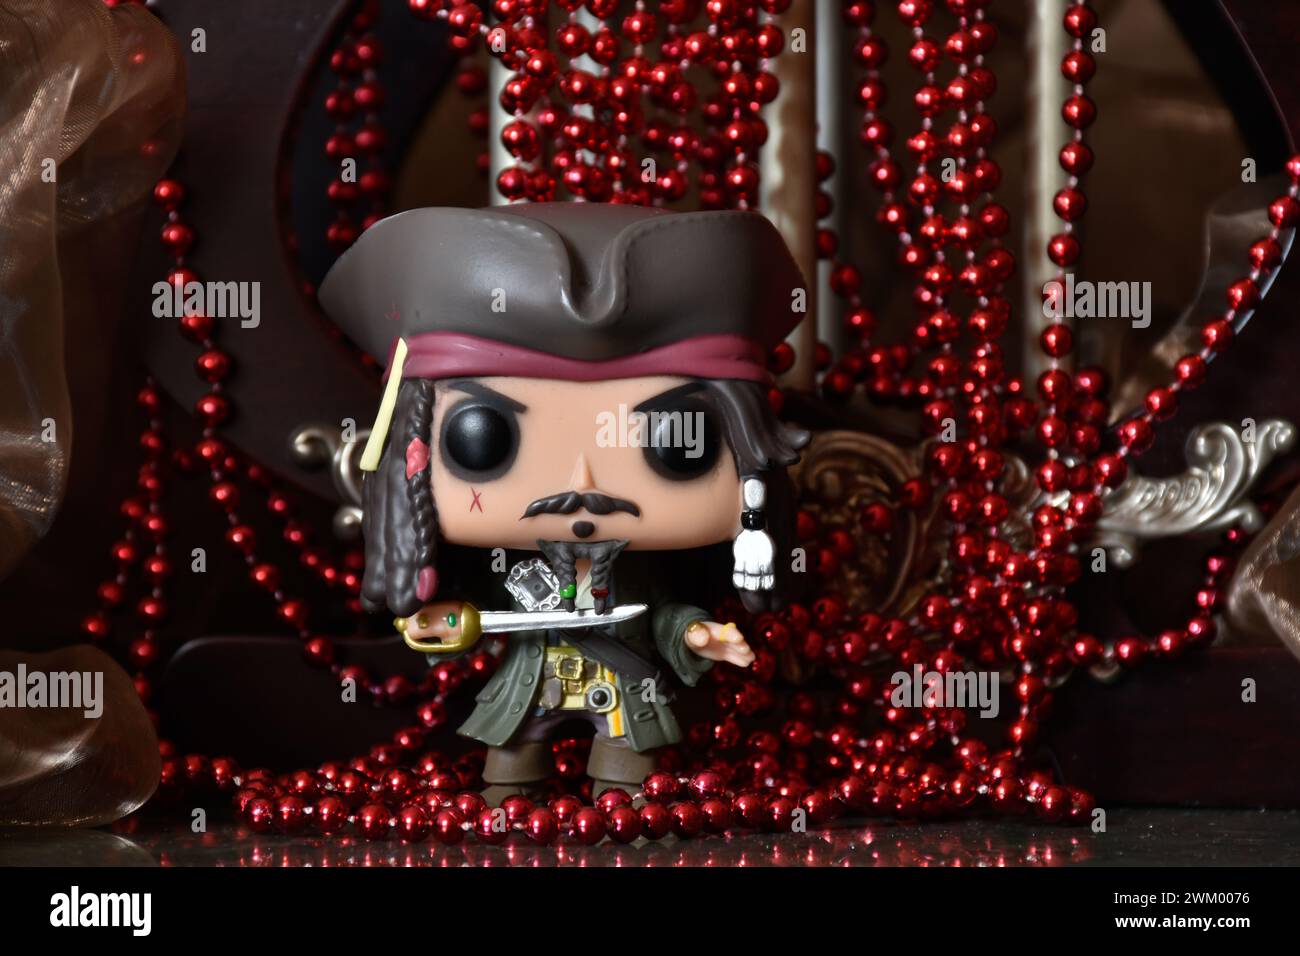 Funko Pop action figure of captain Jack Sparrow from movie Pirates of the Caribbean. Treasure, red necklace, cocked hat, sword, cave, dark palace. Stock Photo